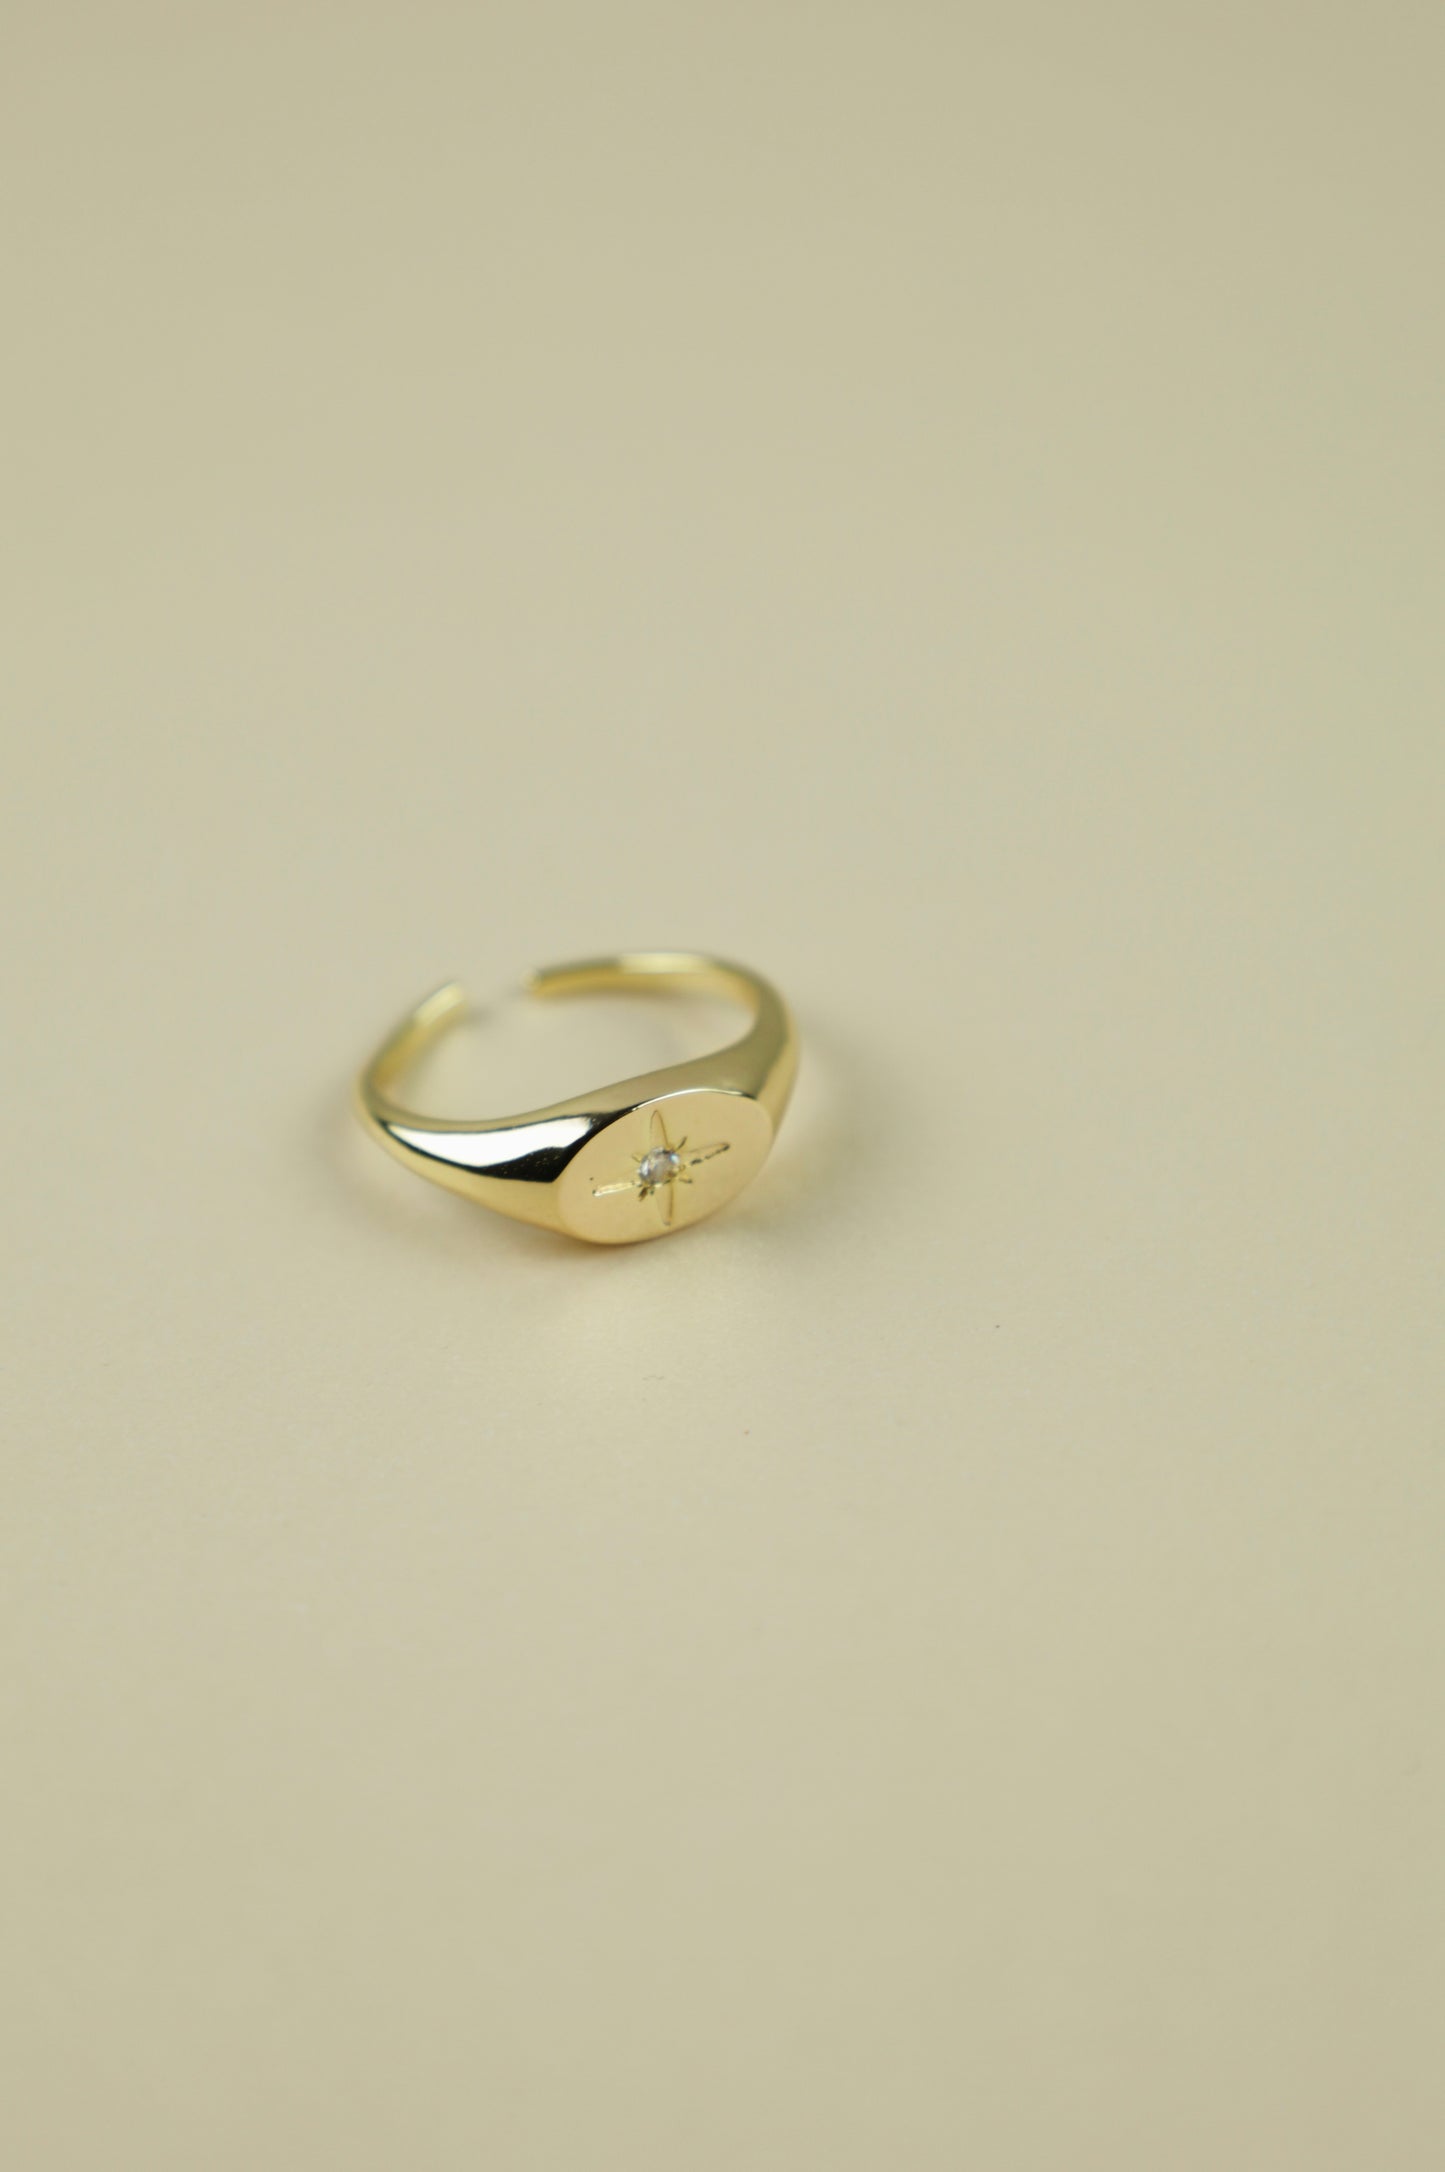 North Star ring in gold